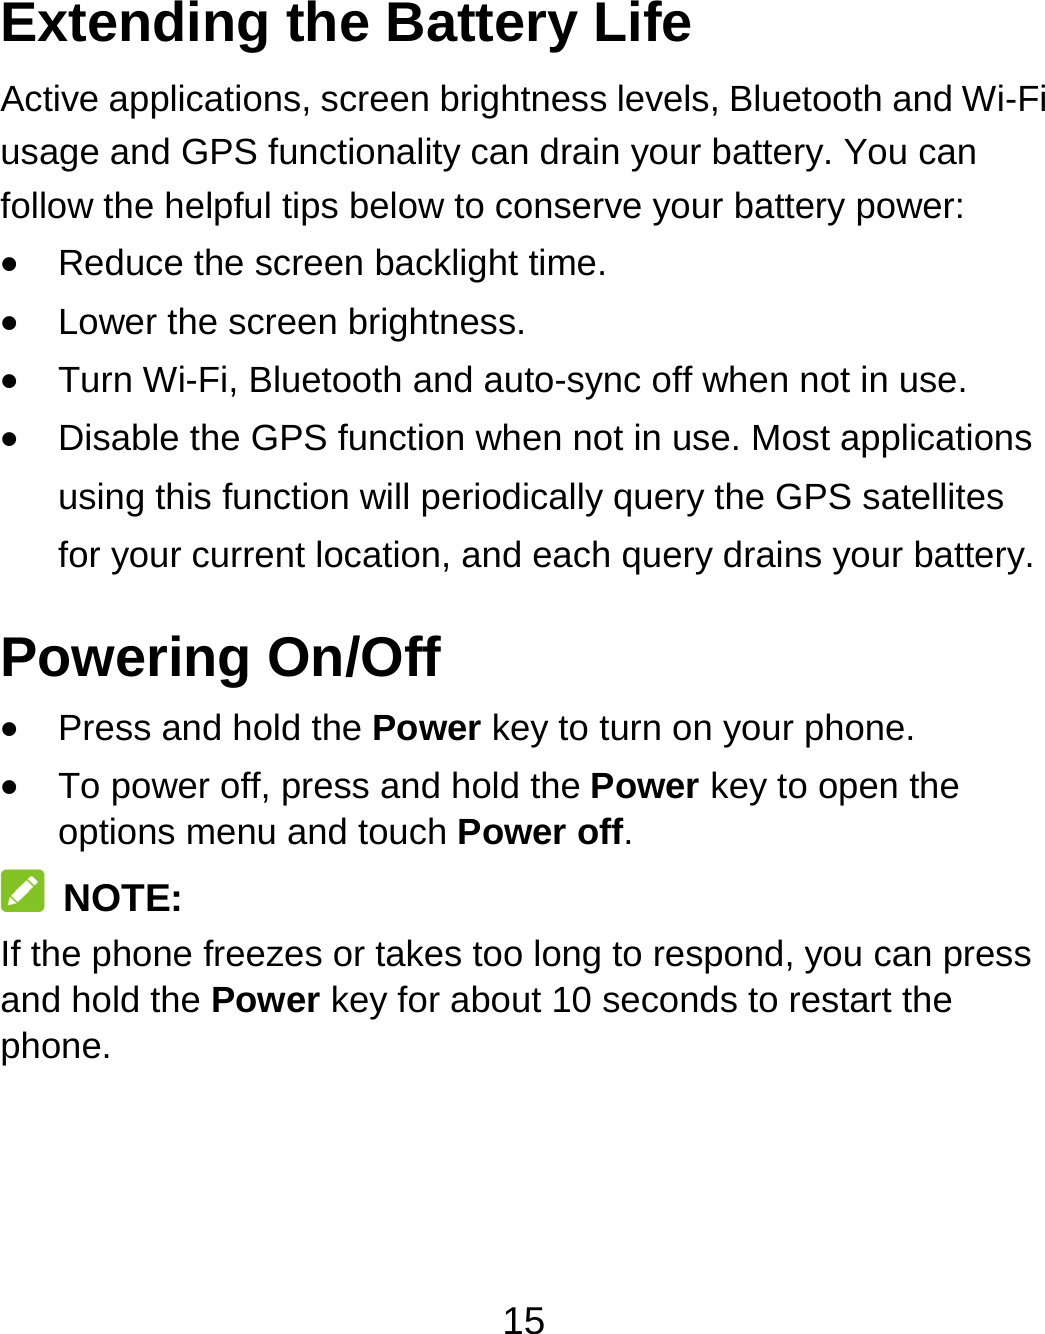 15 Extending the Battery Life Active applications, screen brightness levels, Bluetooth and Wi-Fi usage and GPS functionality can drain your battery. You can follow the helpful tips below to conserve your battery power:  Reduce the screen backlight time.  Lower the screen brightness.  Turn Wi-Fi, Bluetooth and auto-sync off when not in use.  Disable the GPS function when not in use. Most applications using this function will periodically query the GPS satellites for your current location, and each query drains your battery. Powering On/Off    Press and hold the Power key to turn on your phone.  To power off, press and hold the Power key to open the options menu and touch Power off.  NOTE: If the phone freezes or takes too long to respond, you can press and hold the Power key for about 10 seconds to restart the phone.  